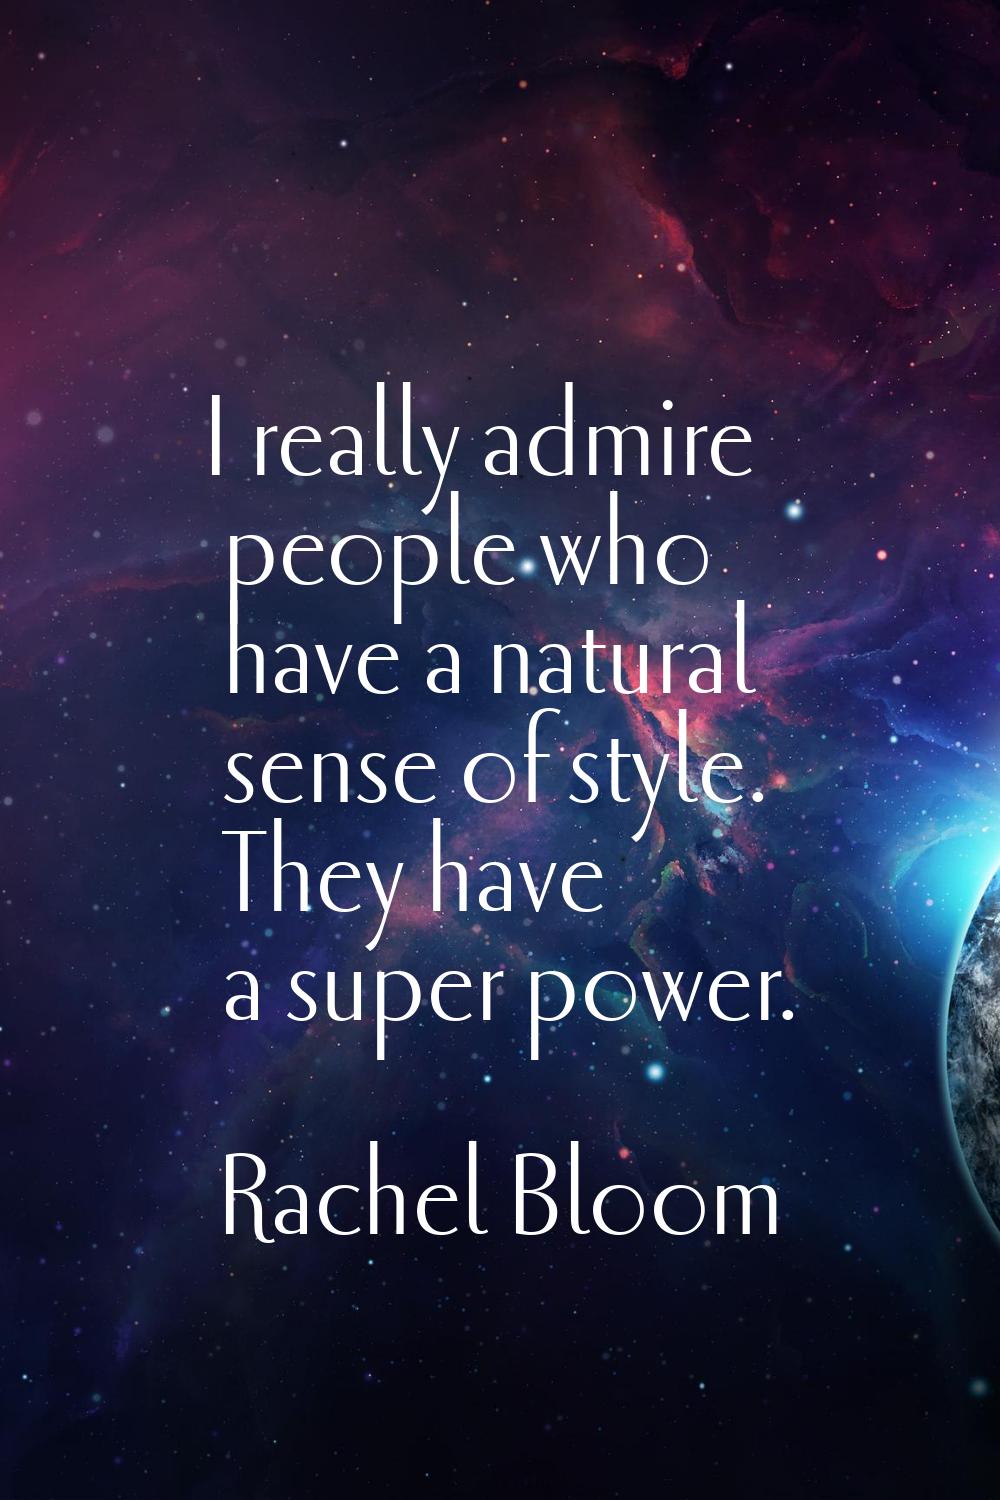 I really admire people who have a natural sense of style. They have a super power.